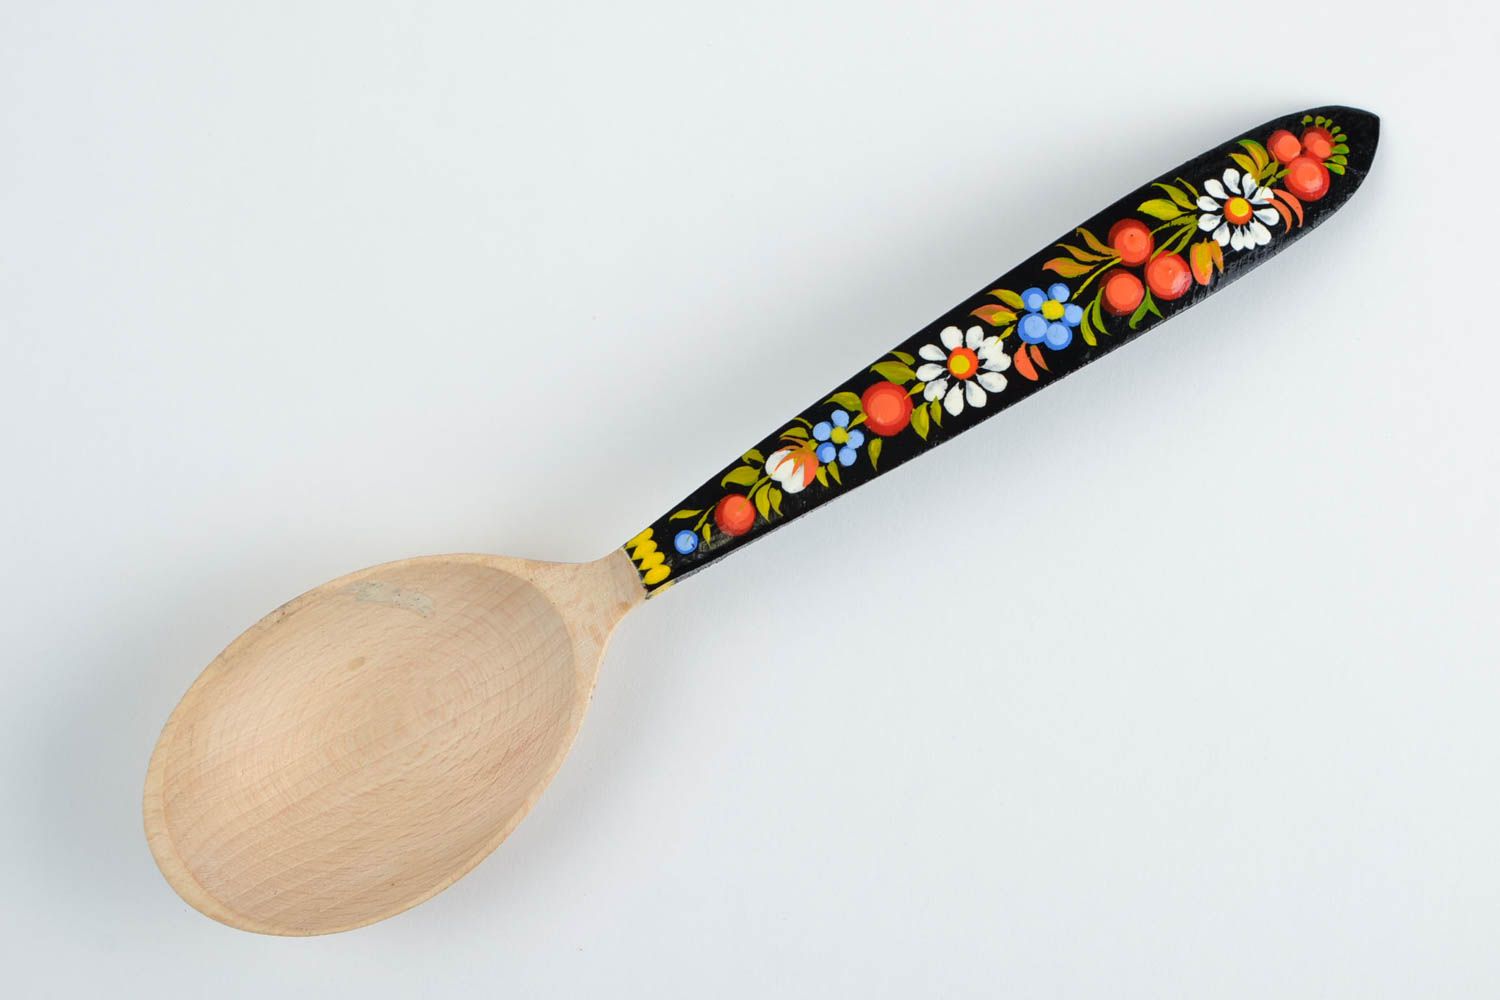 Small handmade wooden spoon kitchen tools cooking tools kitchen design photo 3